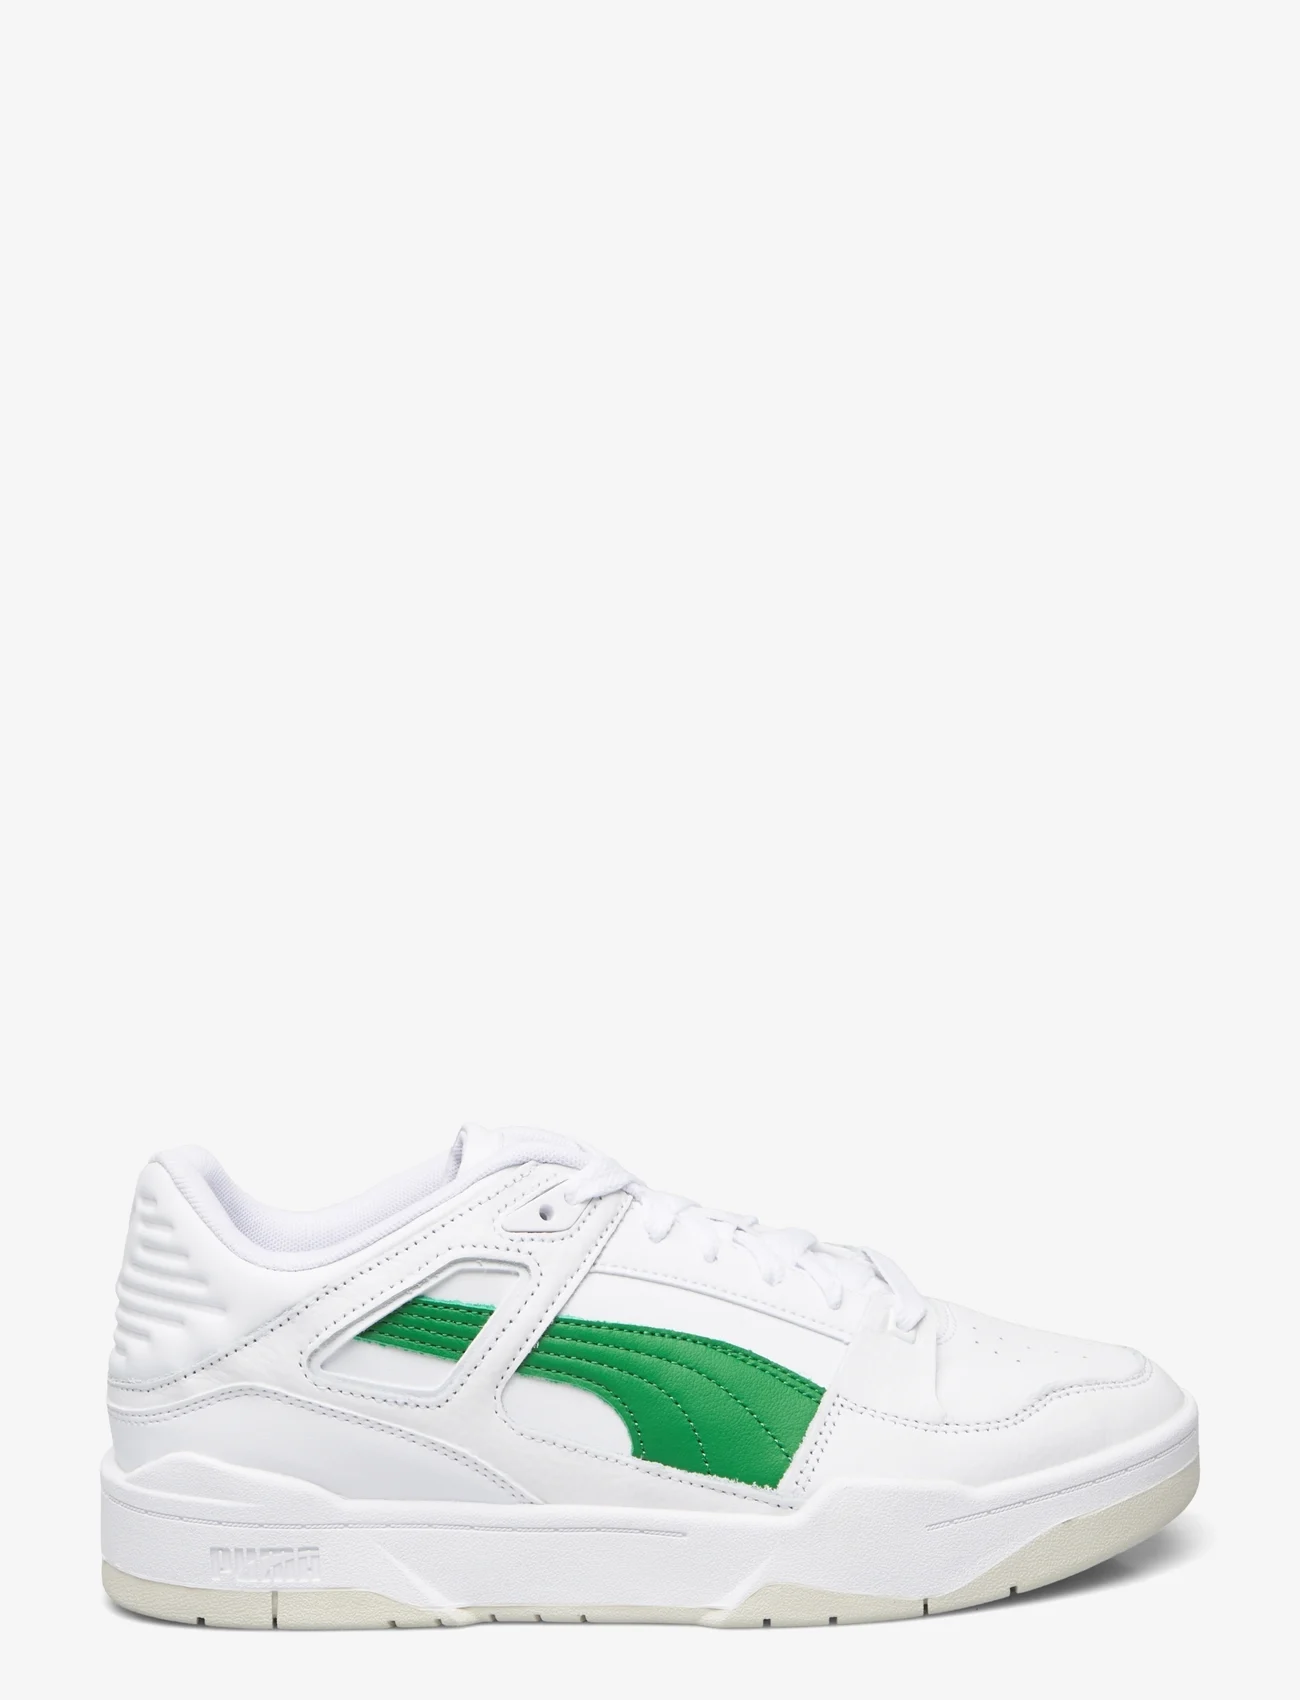 PUMA - Slipstream lth - low top sneakers - puma white-archive green - 1